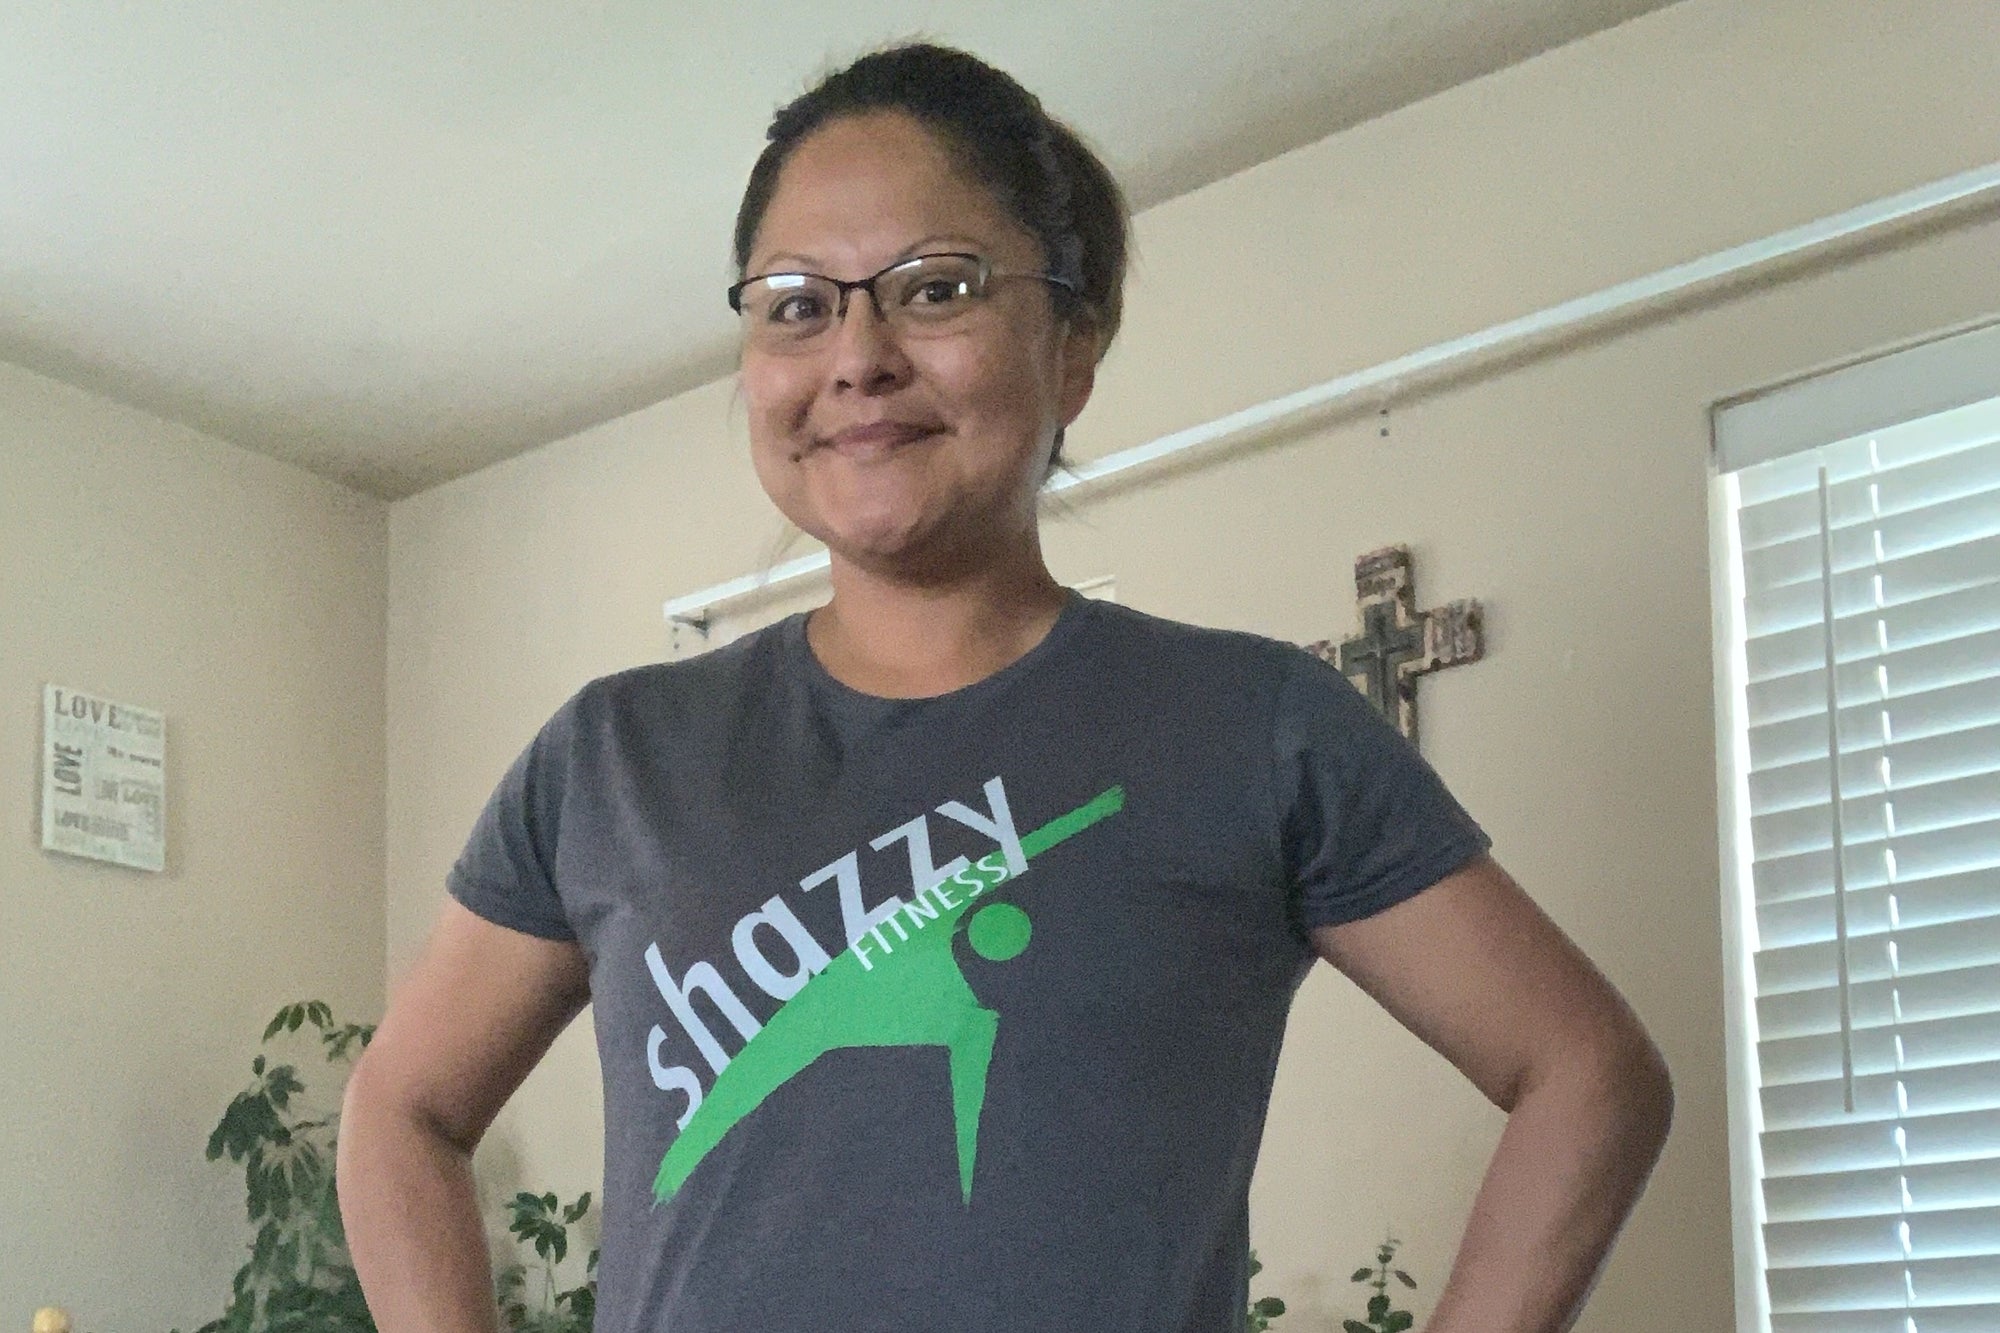 Exercise to Uplifting Encouraging Music with Shazzy Fitness: Meet Sausha Nells!